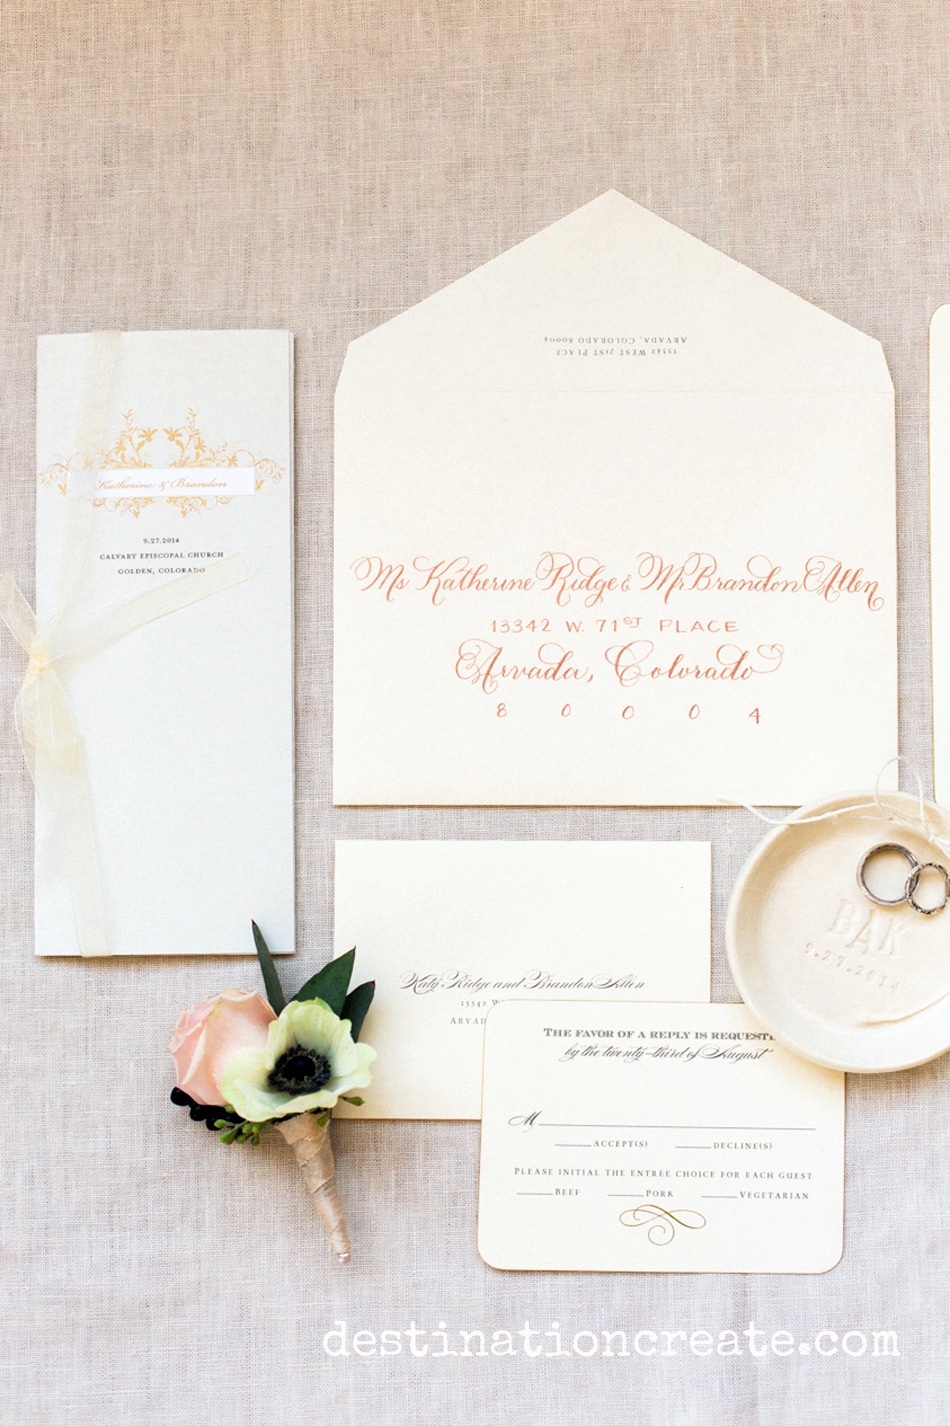 Blush & gold invitations set the stage for the romantic and luxurious wedding that is to come